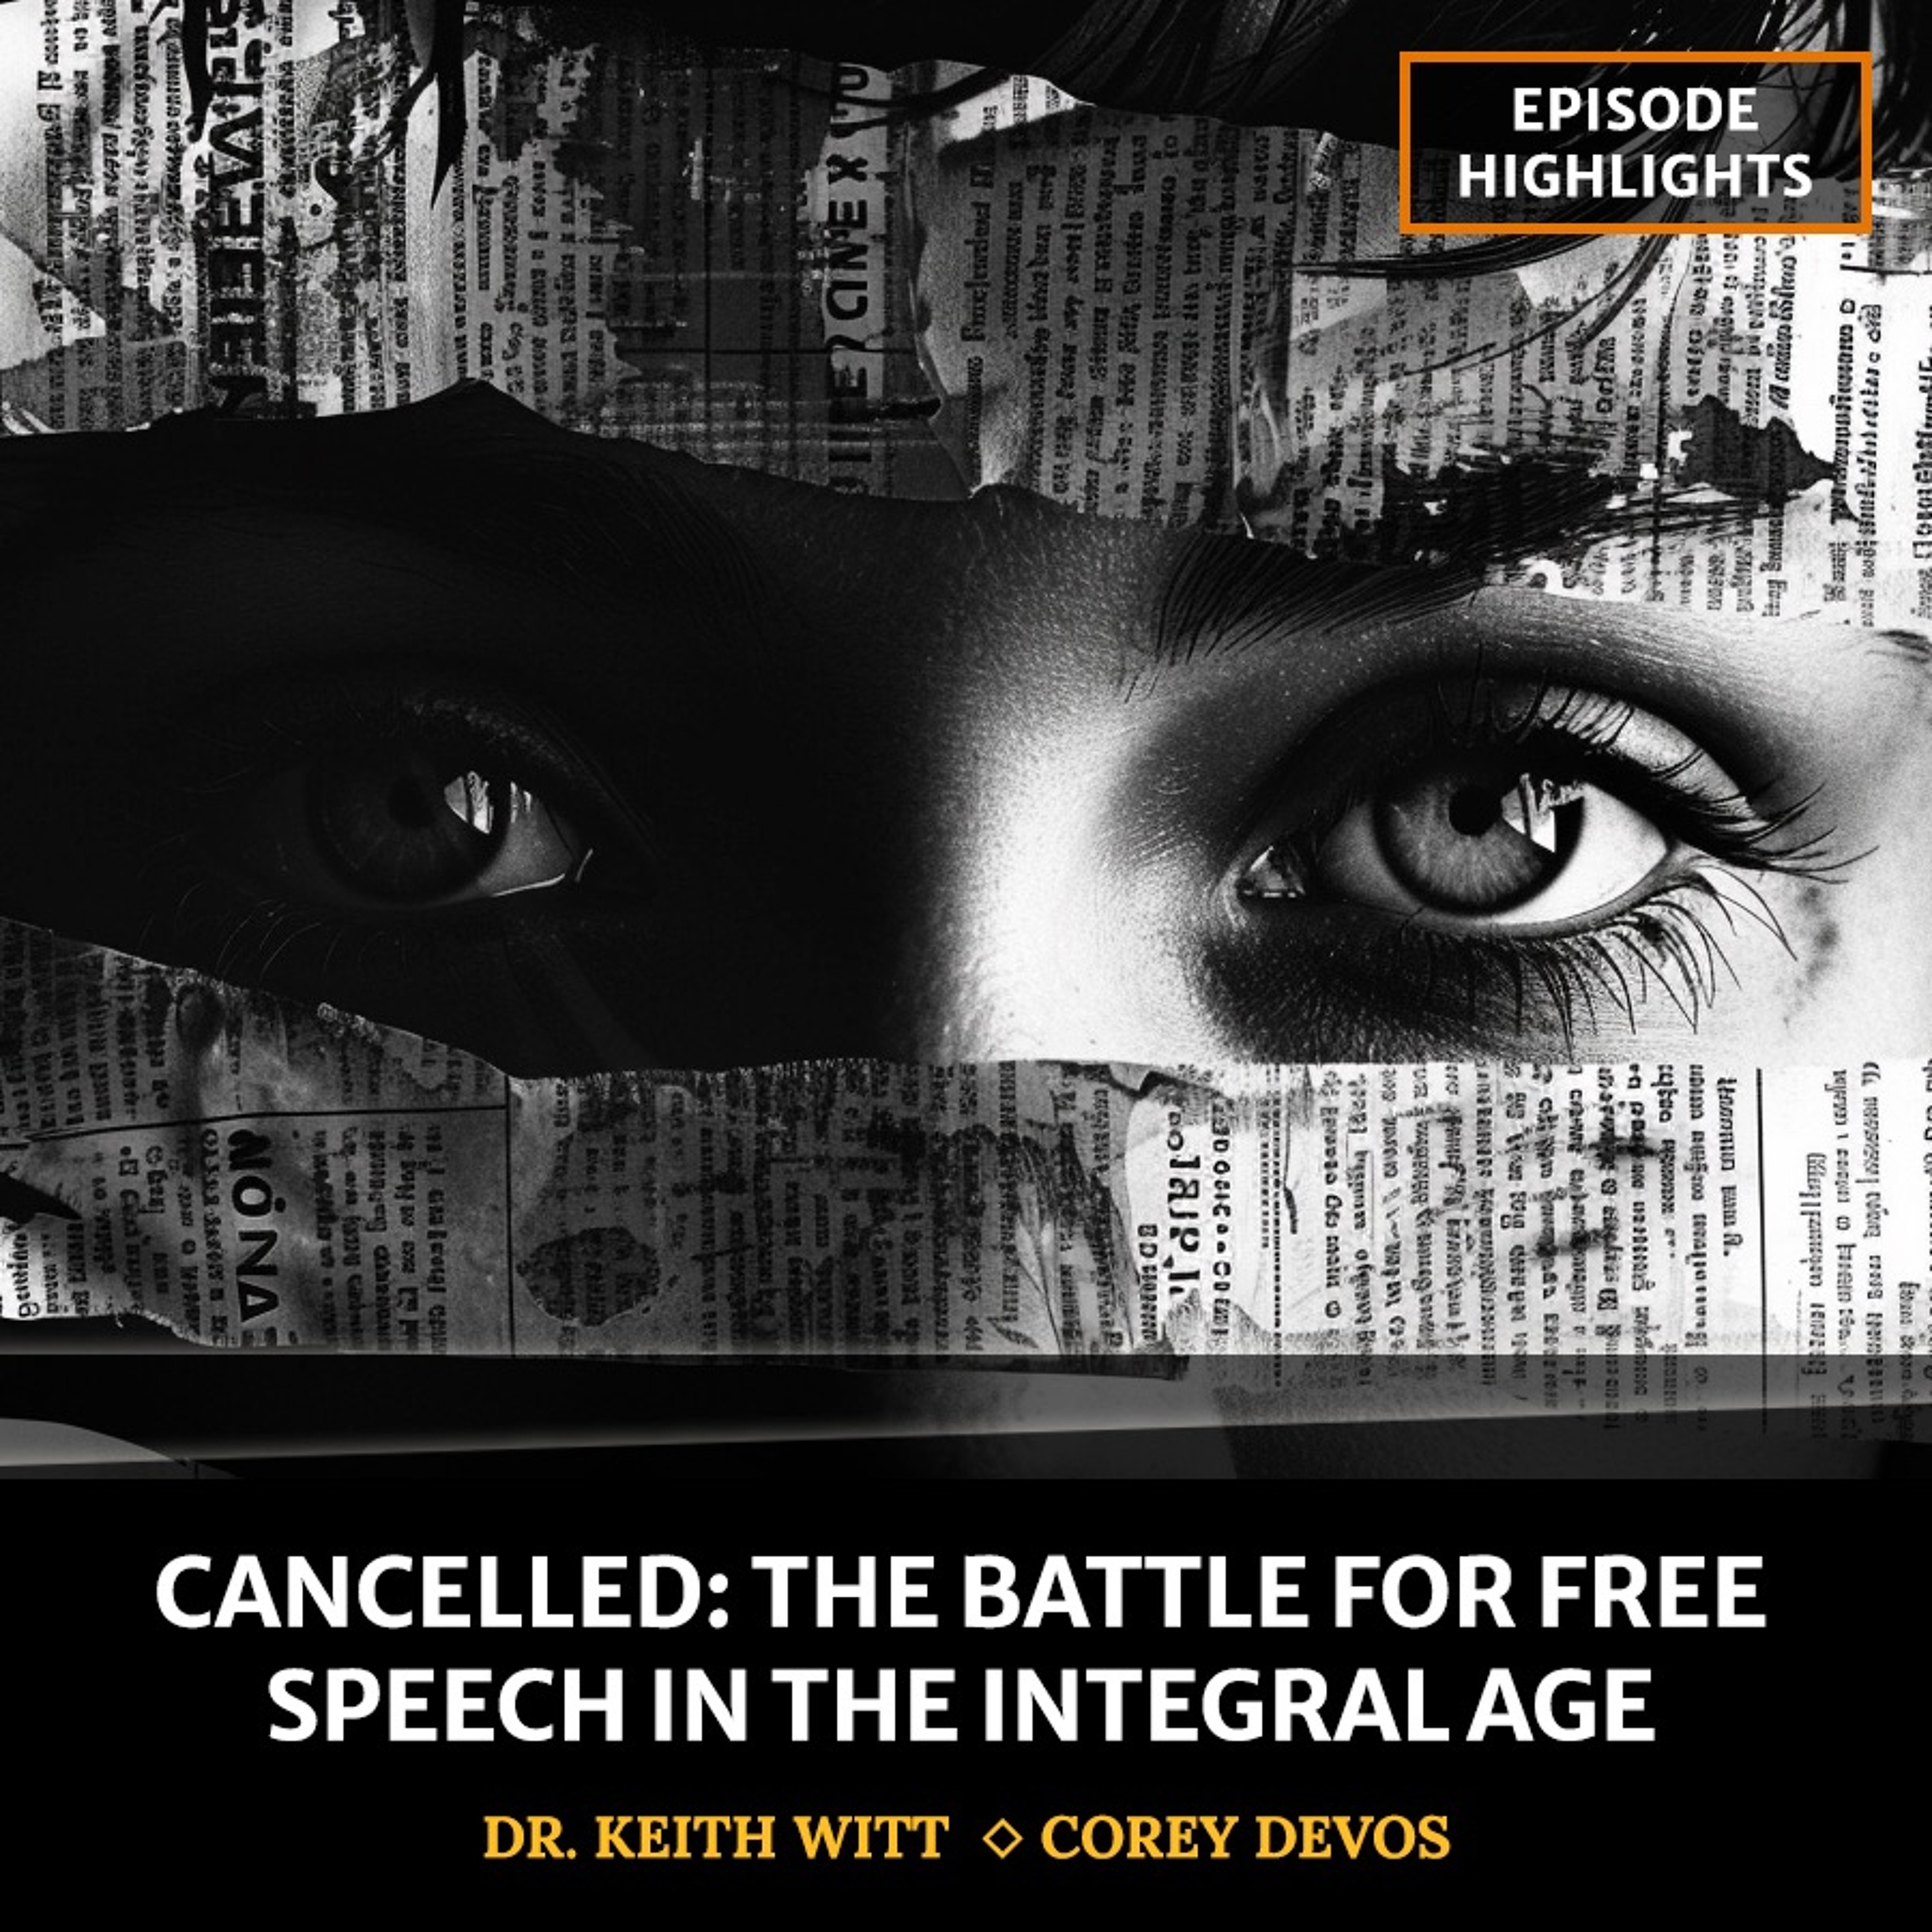 CANCELLED: The Battle for Free Speech in the Integral Age [Episode Highlights]